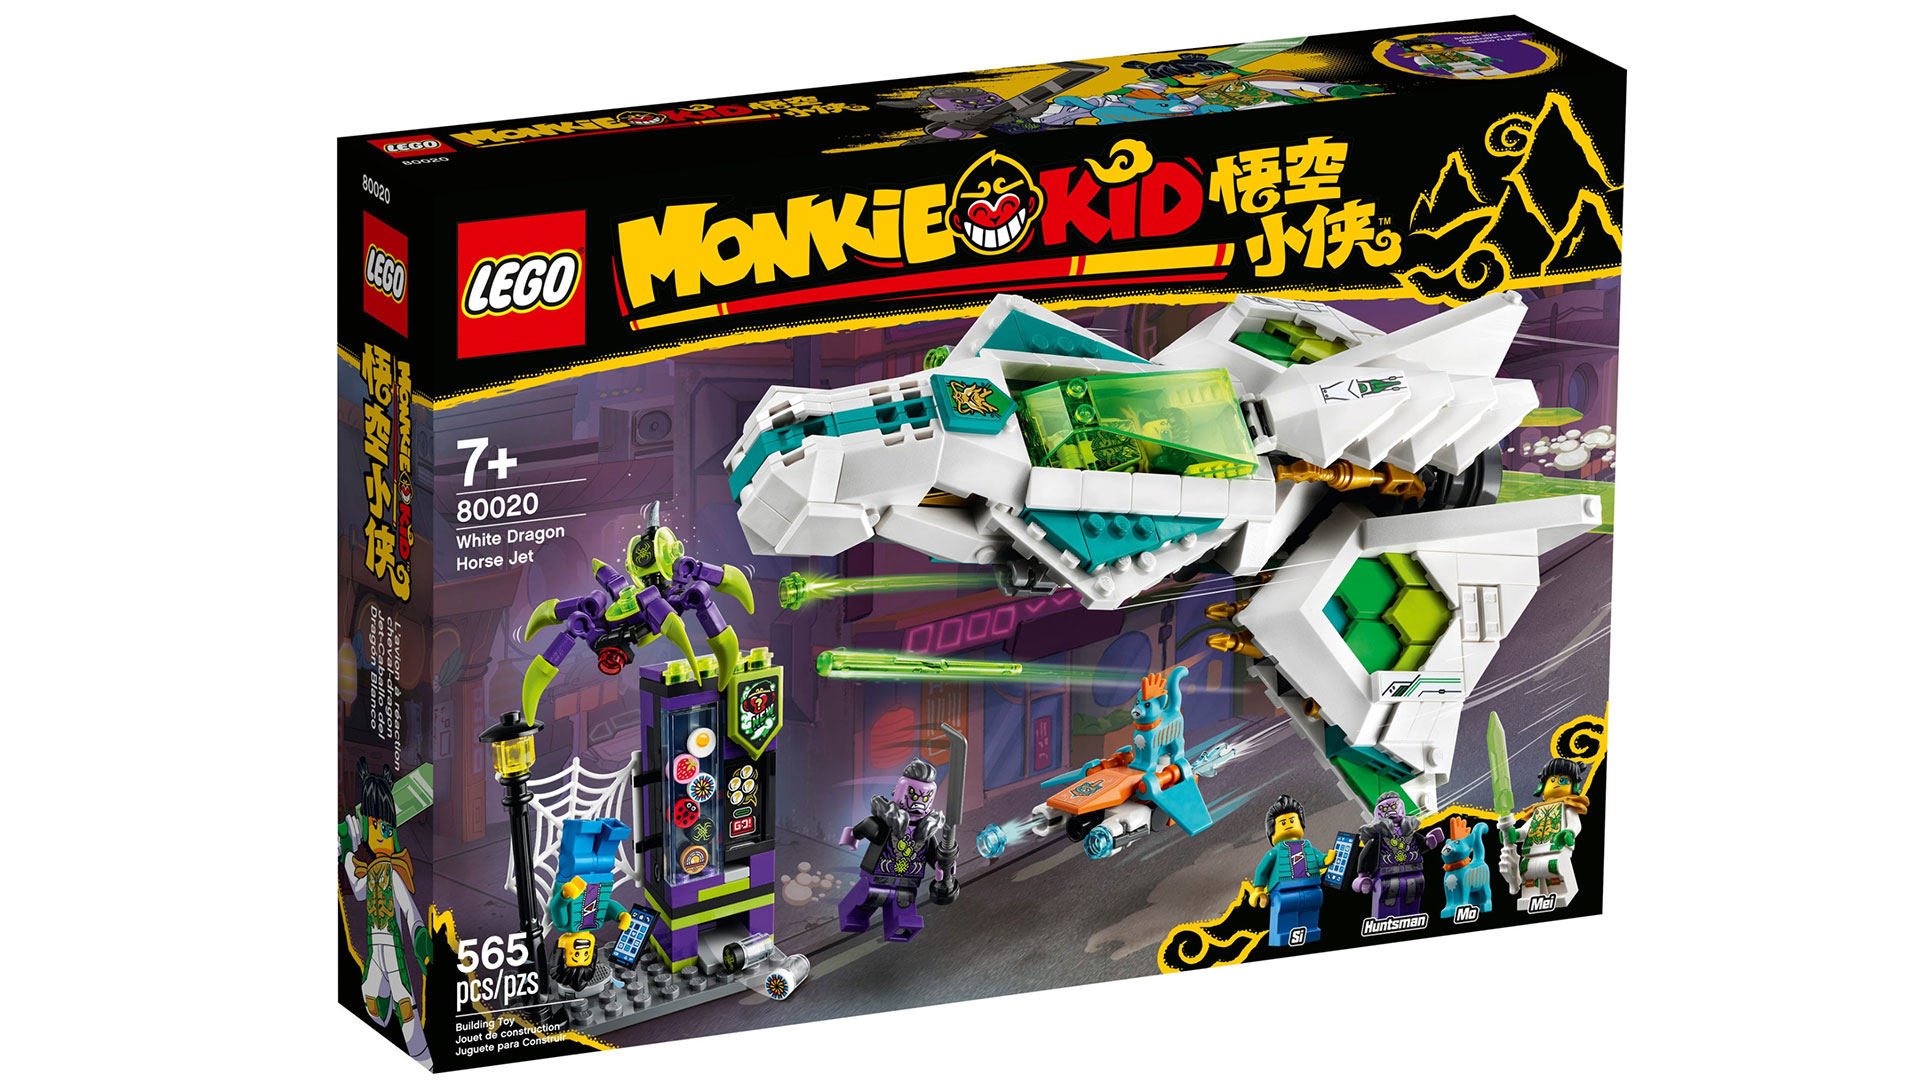 Give your little hero a fun, rewarding building experience and hours of creative play with this exciting LEGO® Monkie Kid™ jet plane playset (80020). A top-quality gift toy for children, it features Mei’s White Dragon Horse Jet, with 2 spring-loaded shooters and 2 stud shooters, a buildable, working vending machine, posable robotic spider, spider trap and stud-shooting hoverboard. Children can role-play as Mei and Mo the cat battling to save a civilian from the Spider Queen’s Huntsman, with 3 minifigures and a LEGO figure.